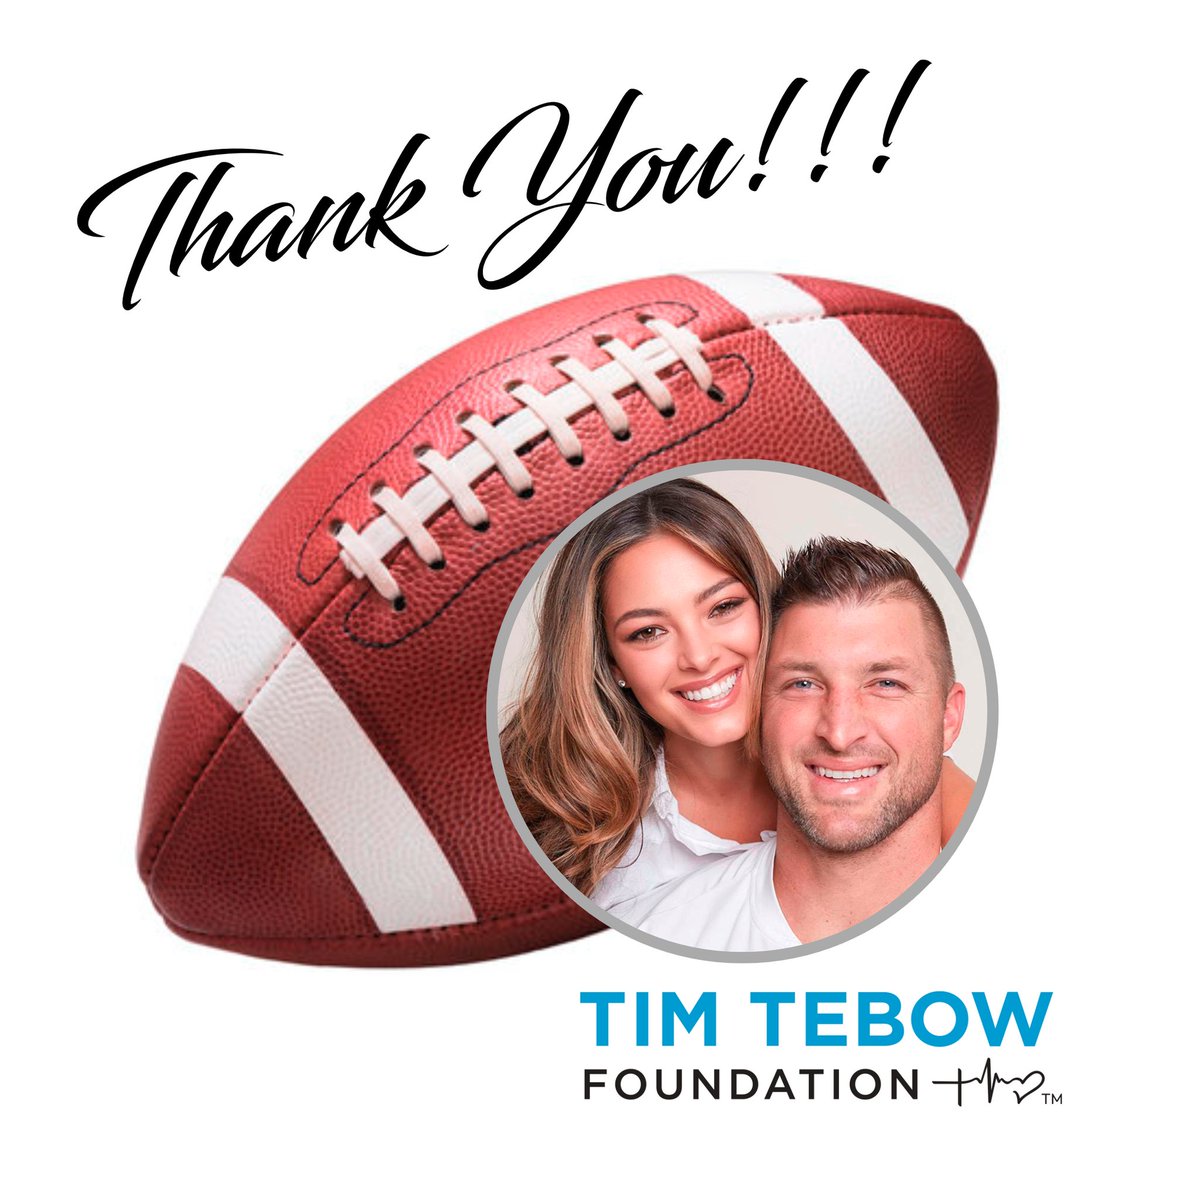 A great big THANK YOU to Tim & Demi-Leigh Tebow, and their Tim Tebow Foundation, for partnering with Breakaway’s “Night of Celebration” missions banquet coming up March 21. RSVP for the dinner, square dance, and silent auction that will include Tim Tebow autographed memorabilia.